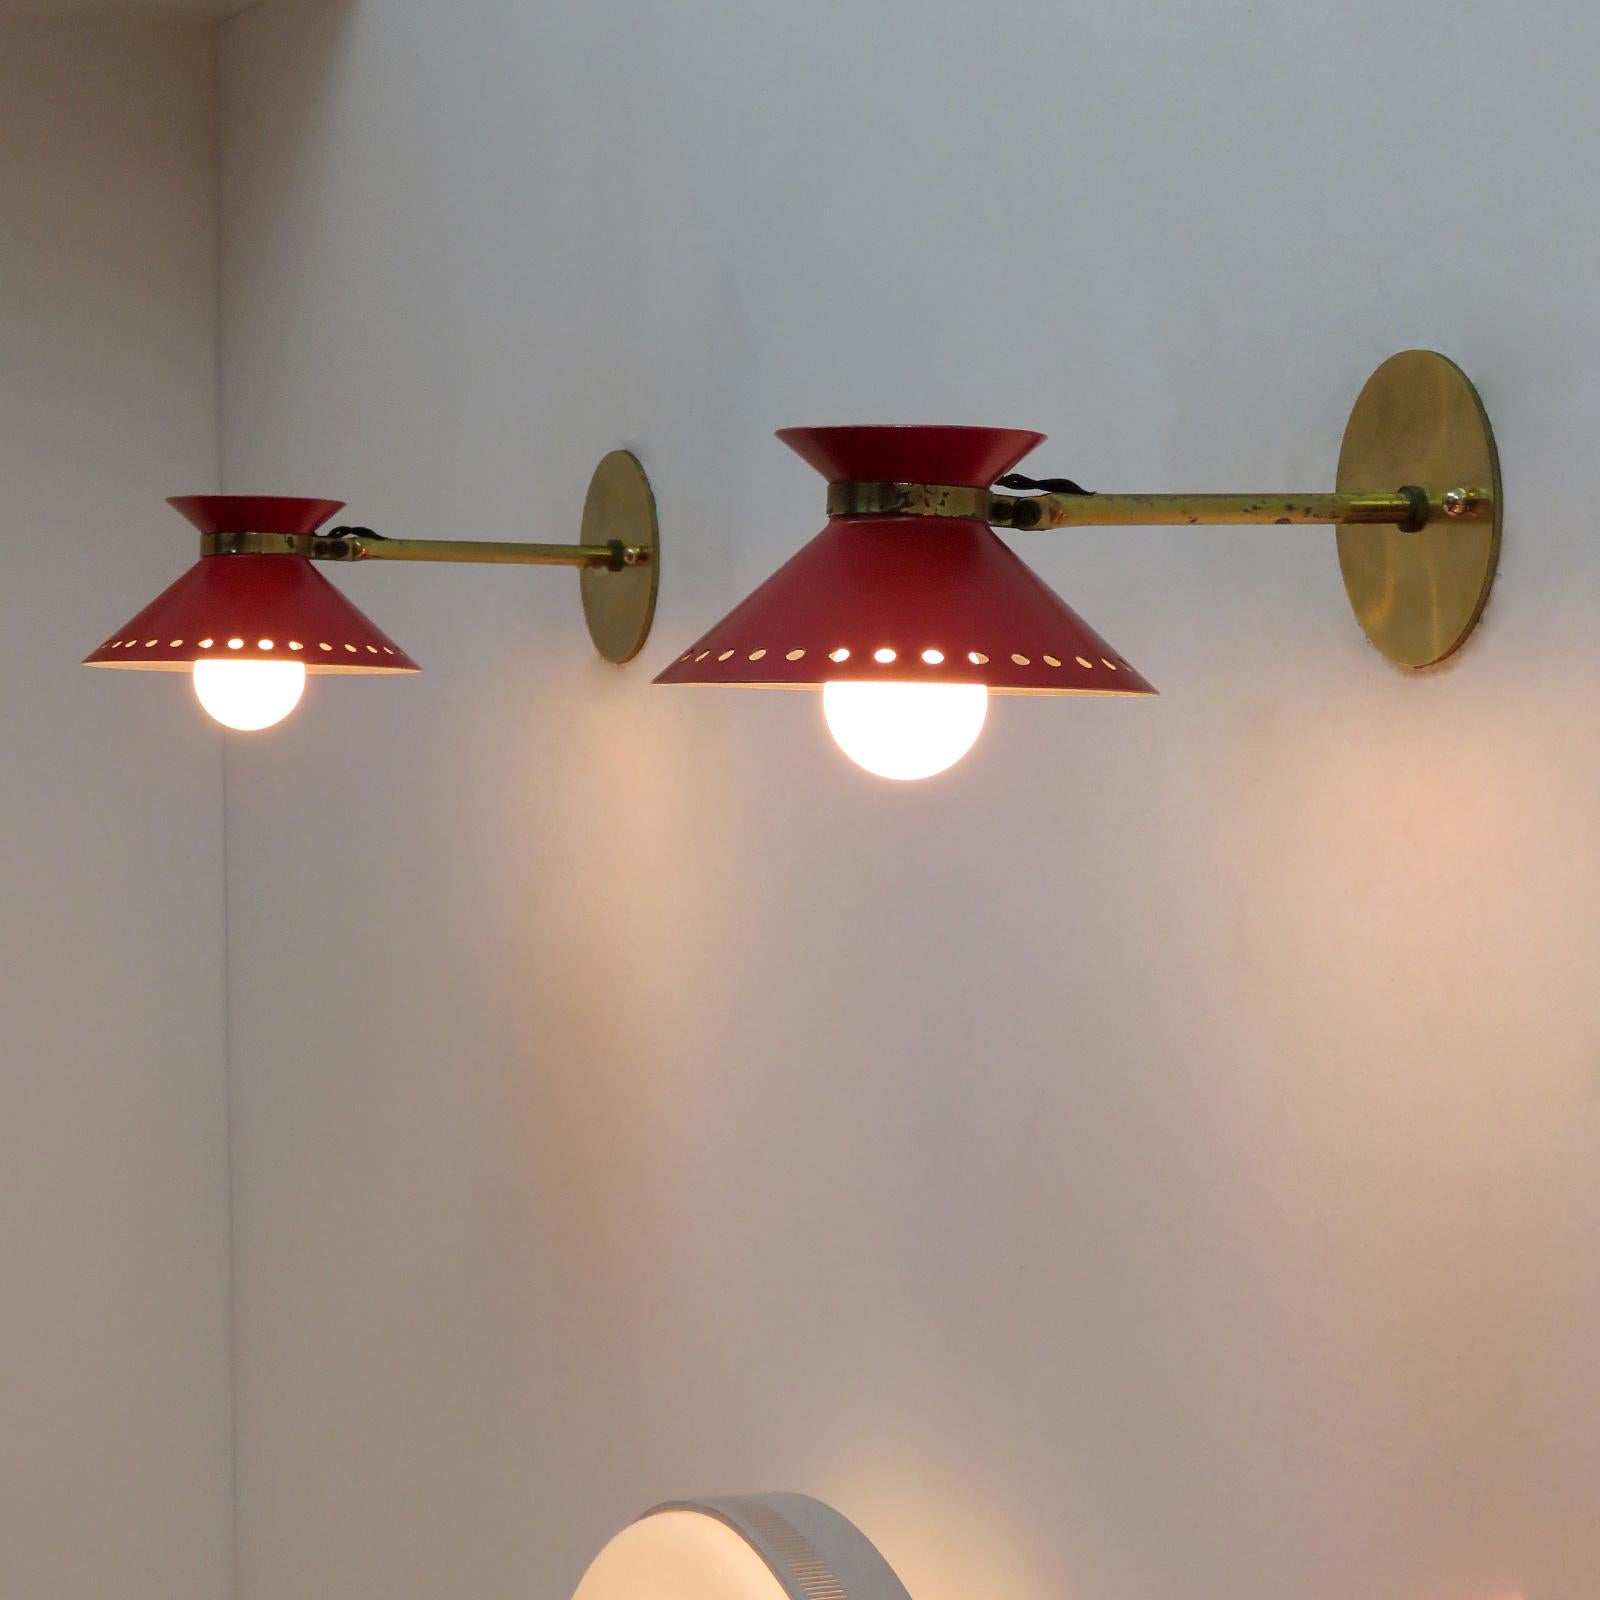 Wonderful pair of red enameled French double cone wall lights by Arlus, with pivoting shades on articulate brass arms, perforated along the bottom edge, wired for US standards, one E12 socket per light, max. wattage 75w or 3-7w LED equivalent, bulbs